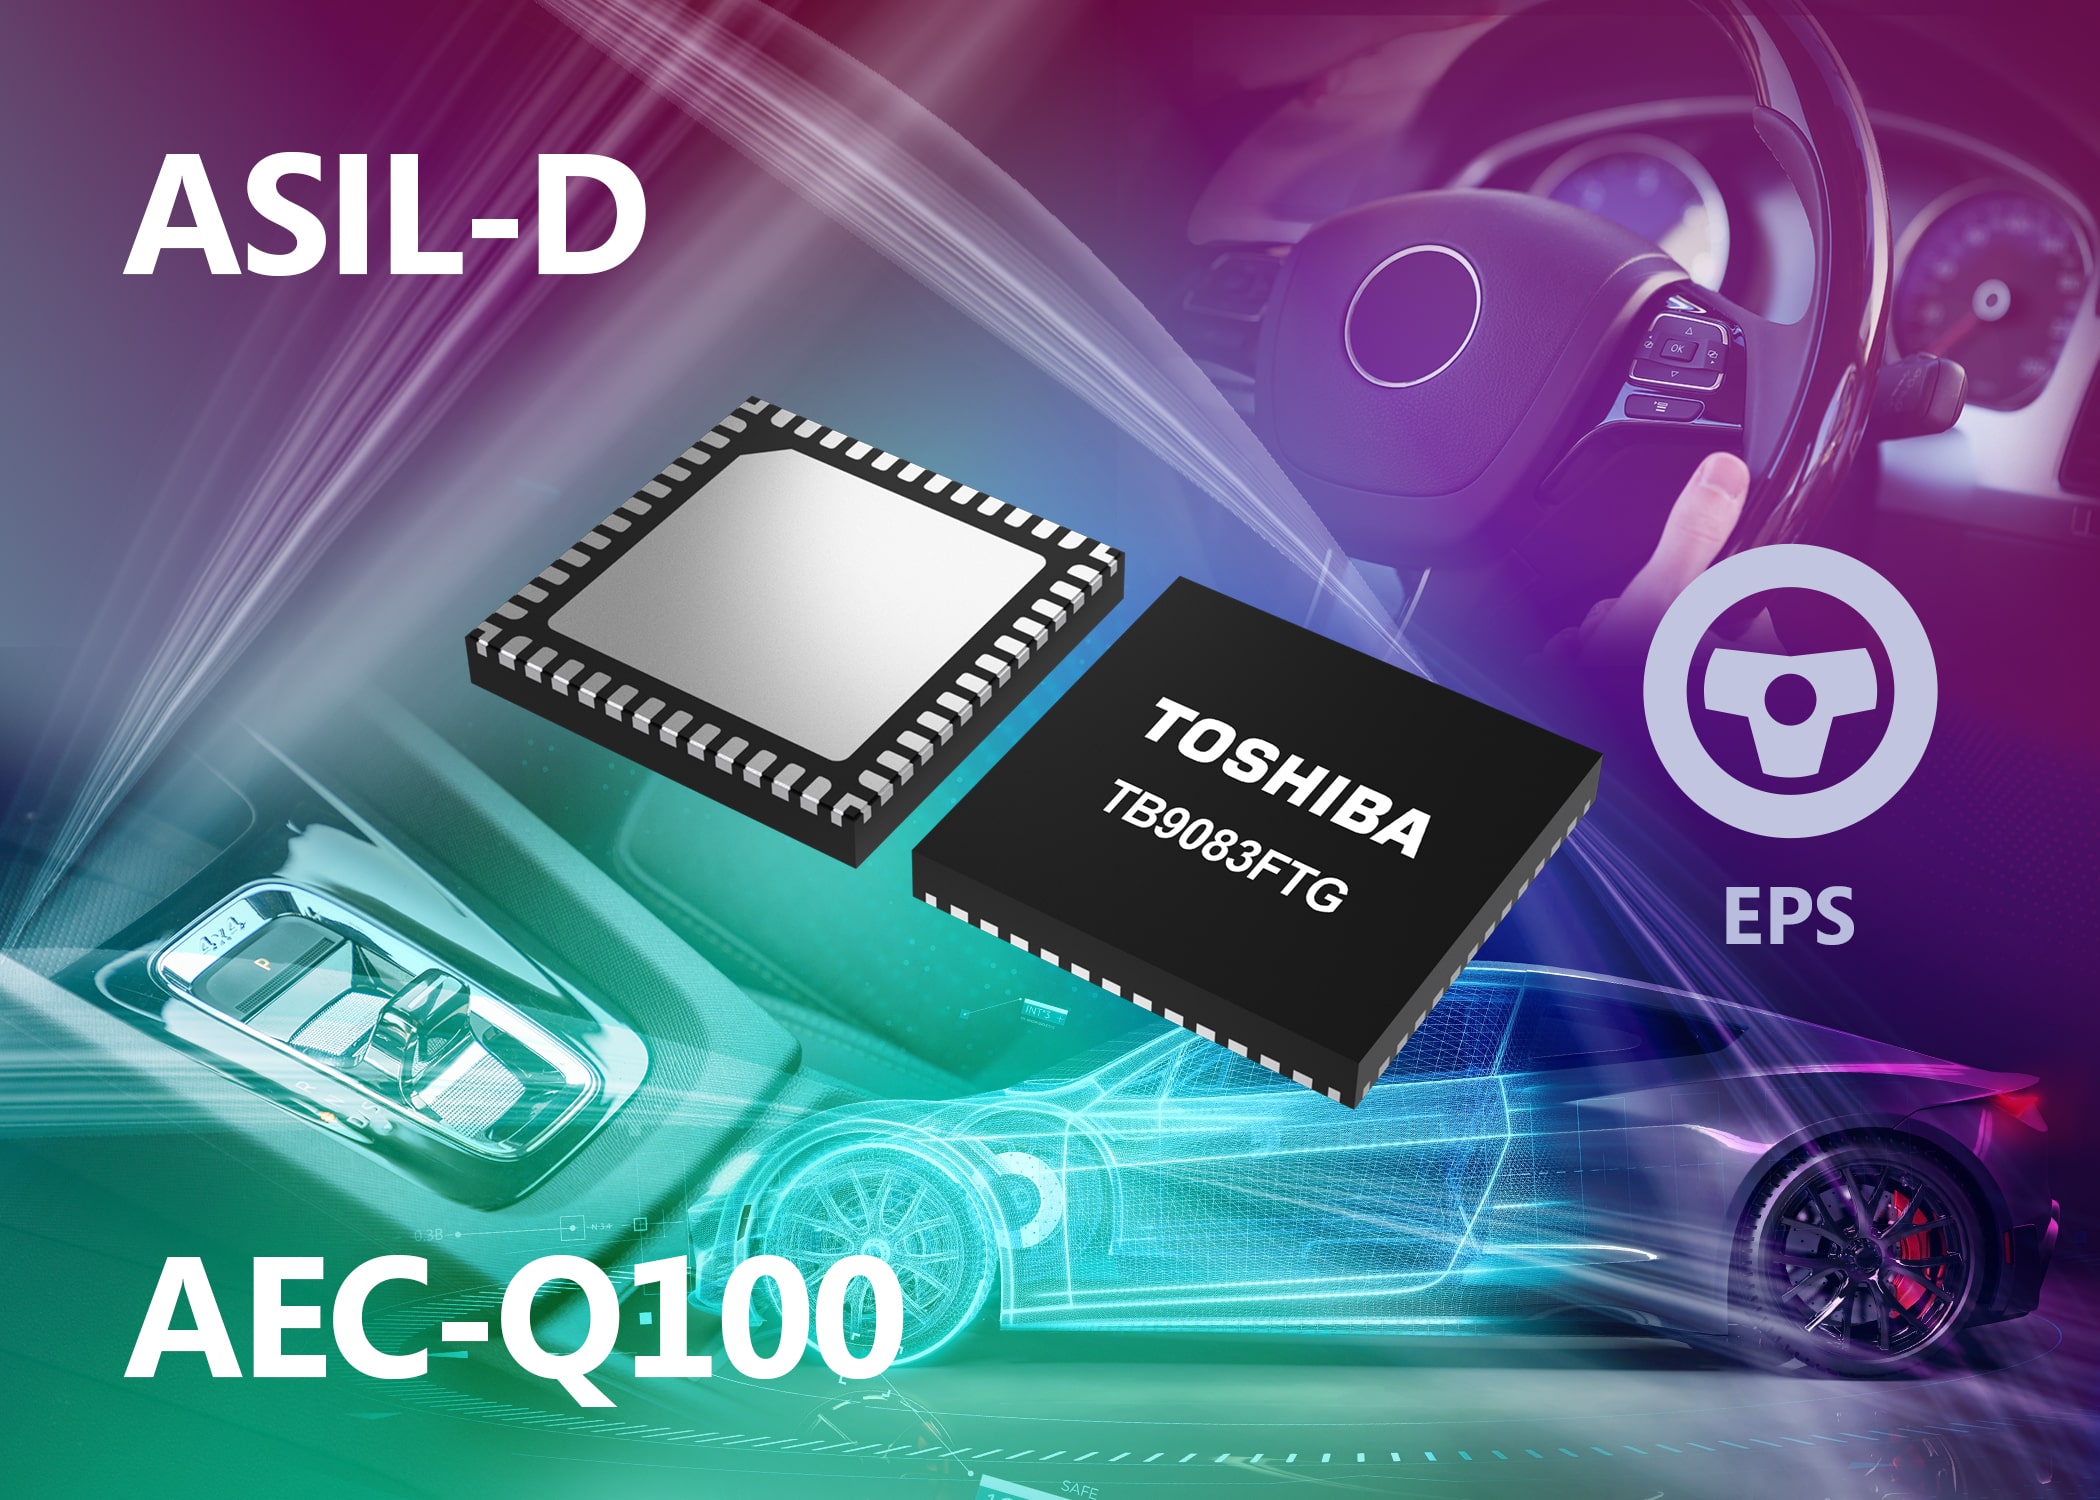 Toshiba’s highly-compact automotive-grade BLDC motor gate driver is now in volume production